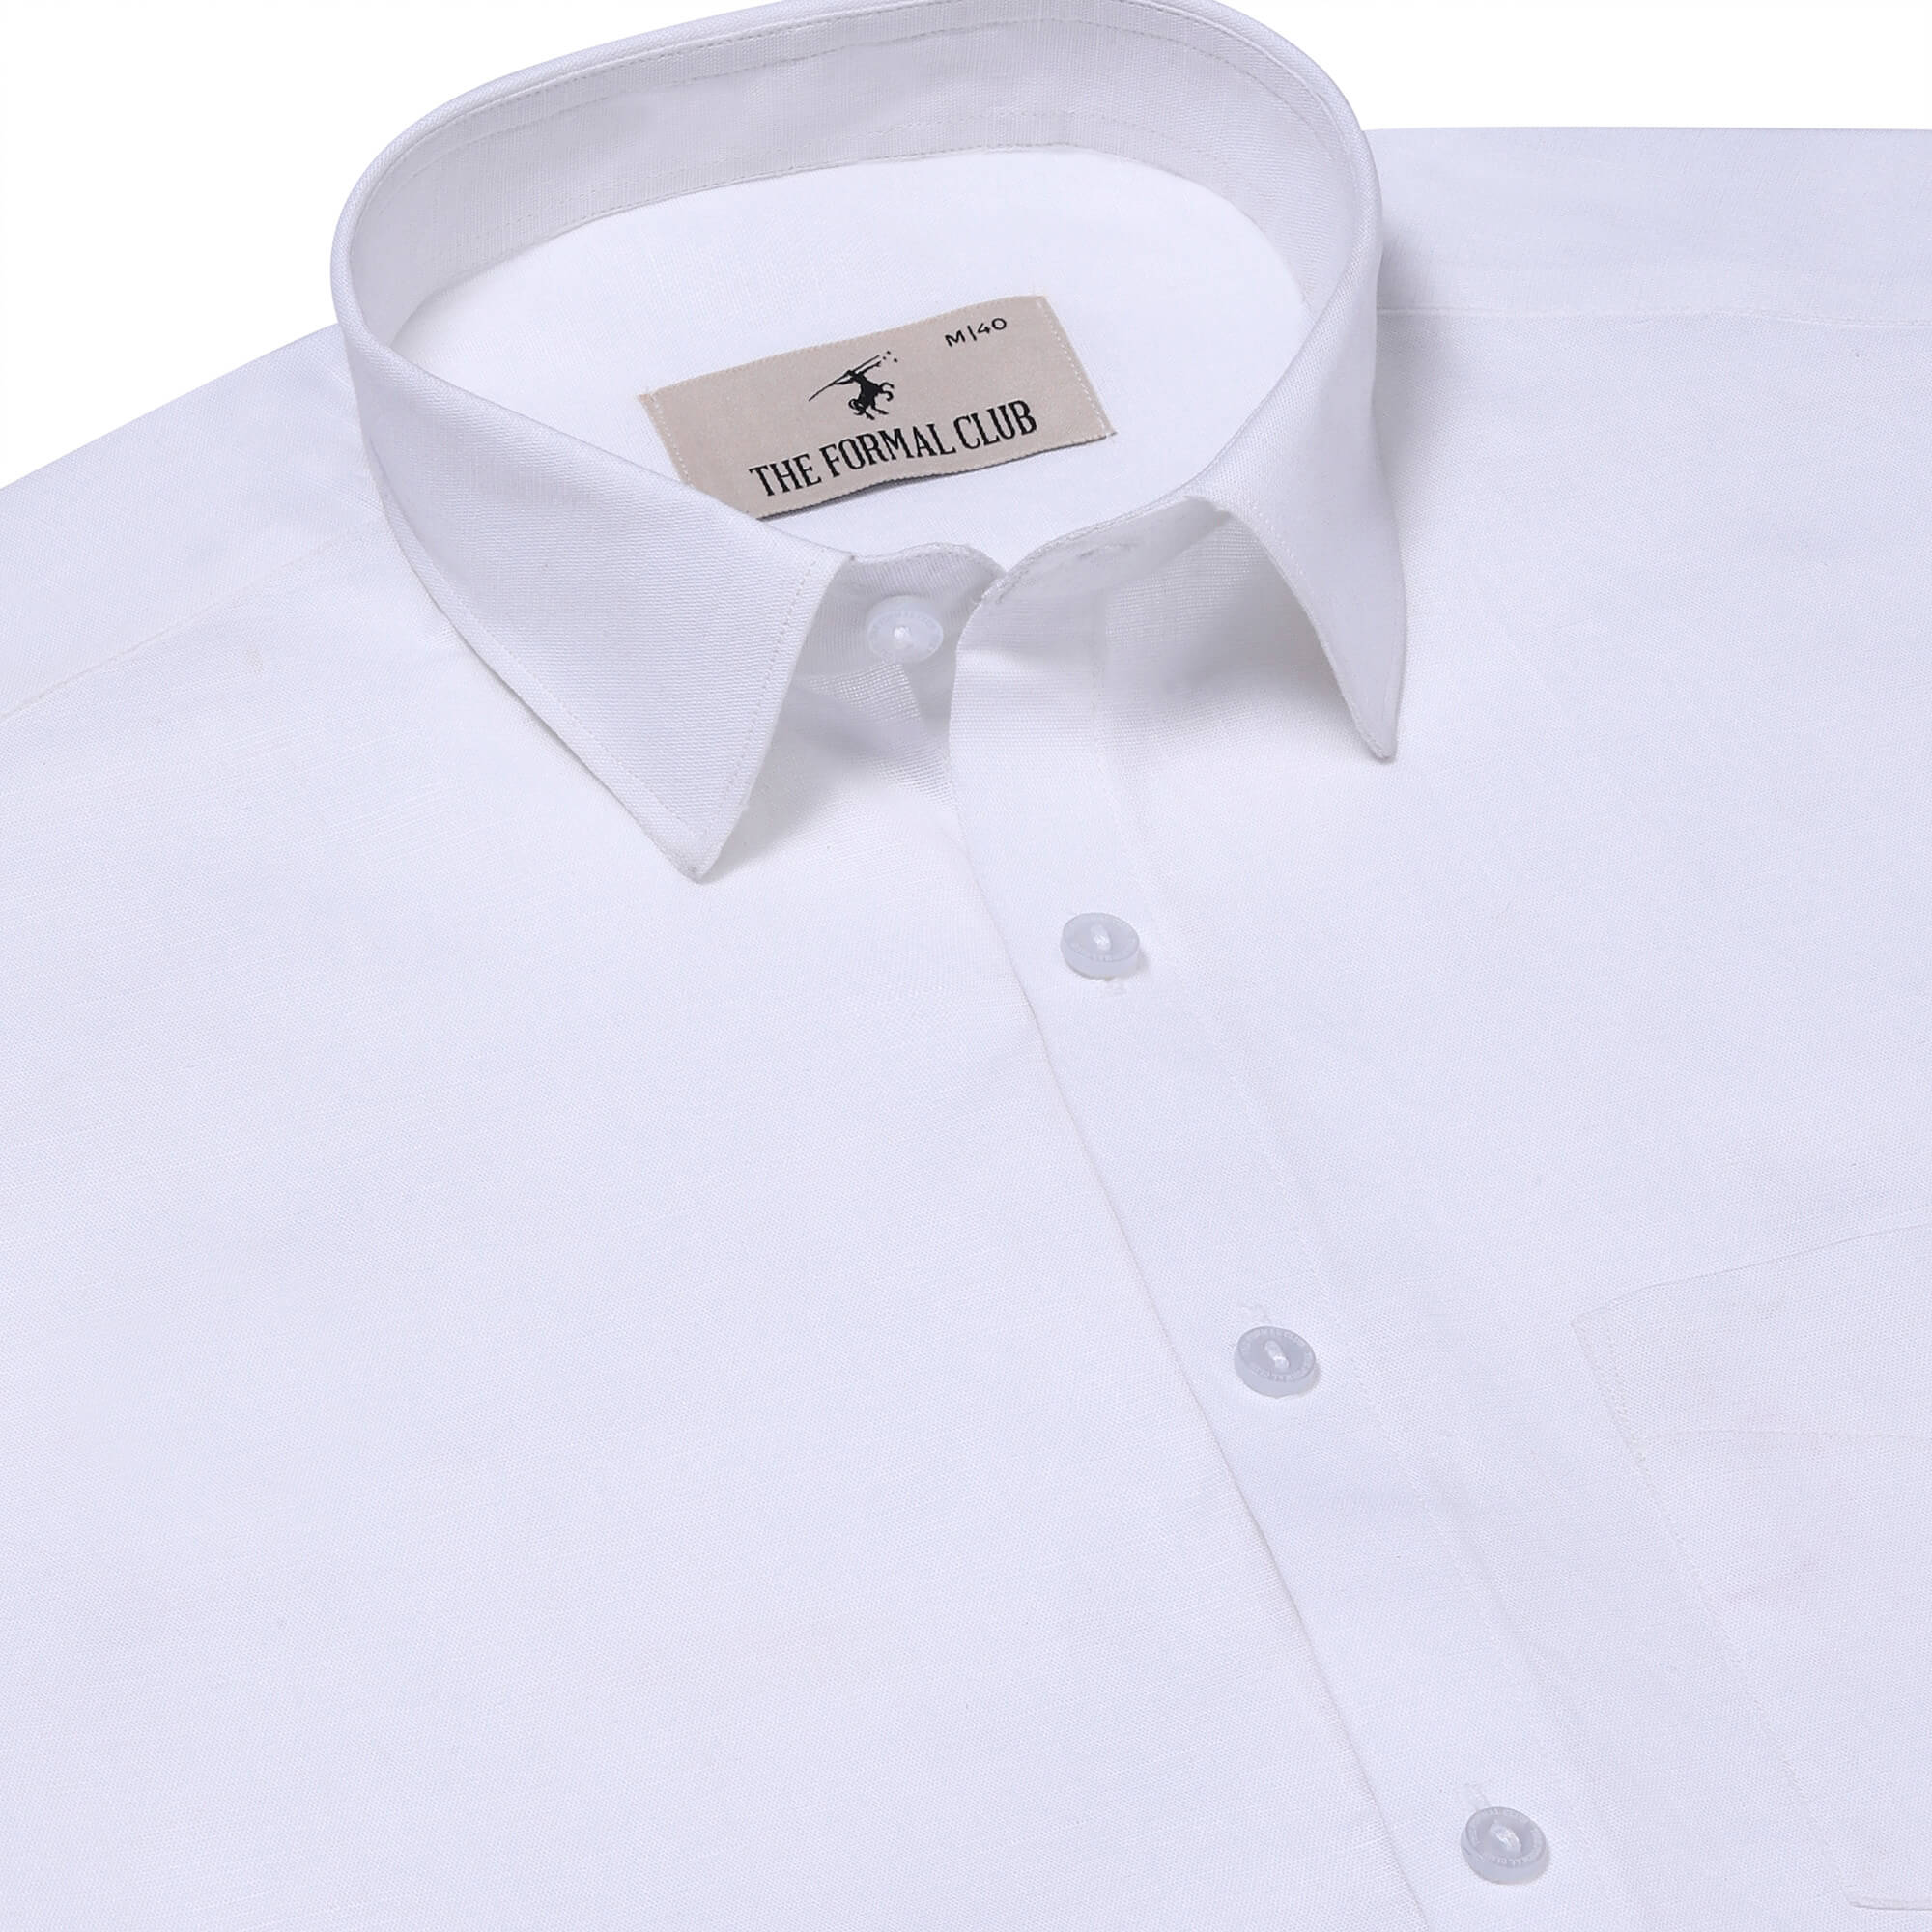 Luna Lenin Solid Shirt In Cool White - The Formal Club